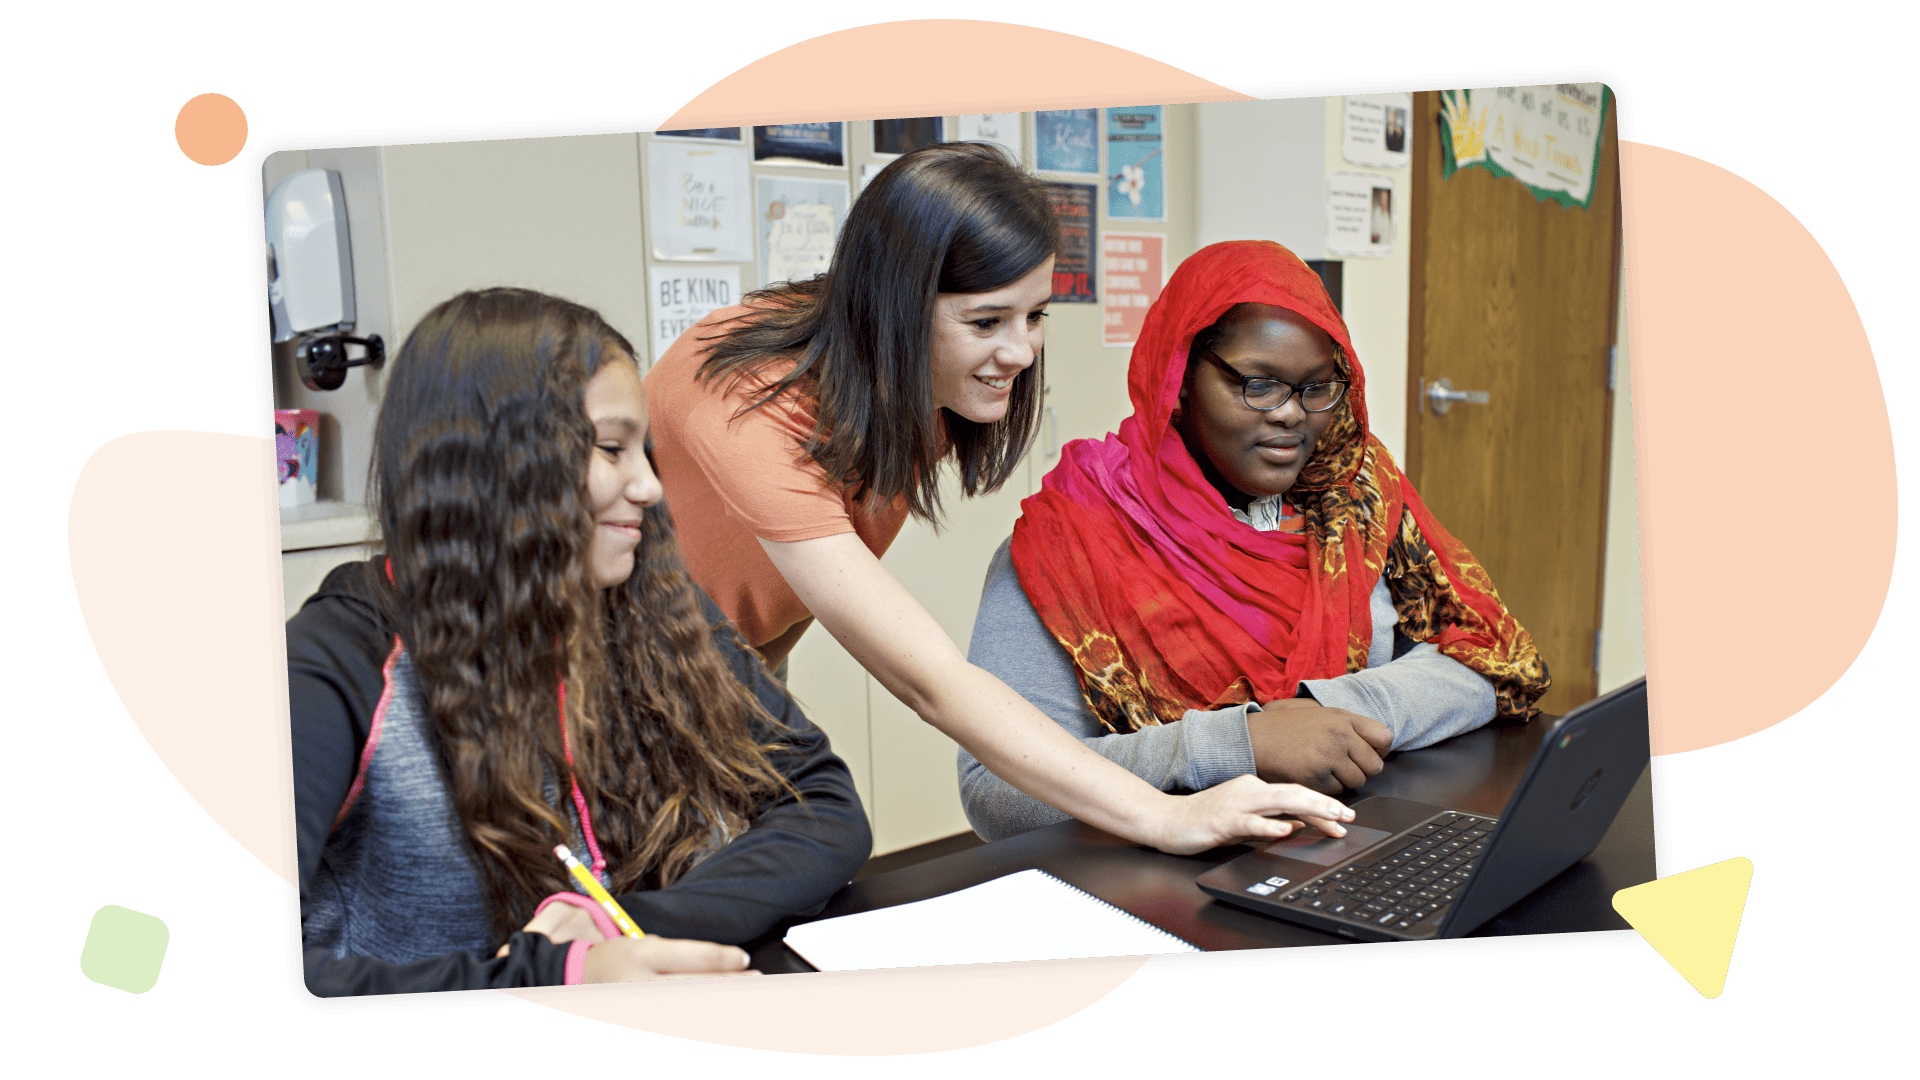 A teacher assists two diverse students with a laptop in a colorful classroom setting, focusing on coping with math anxiety.